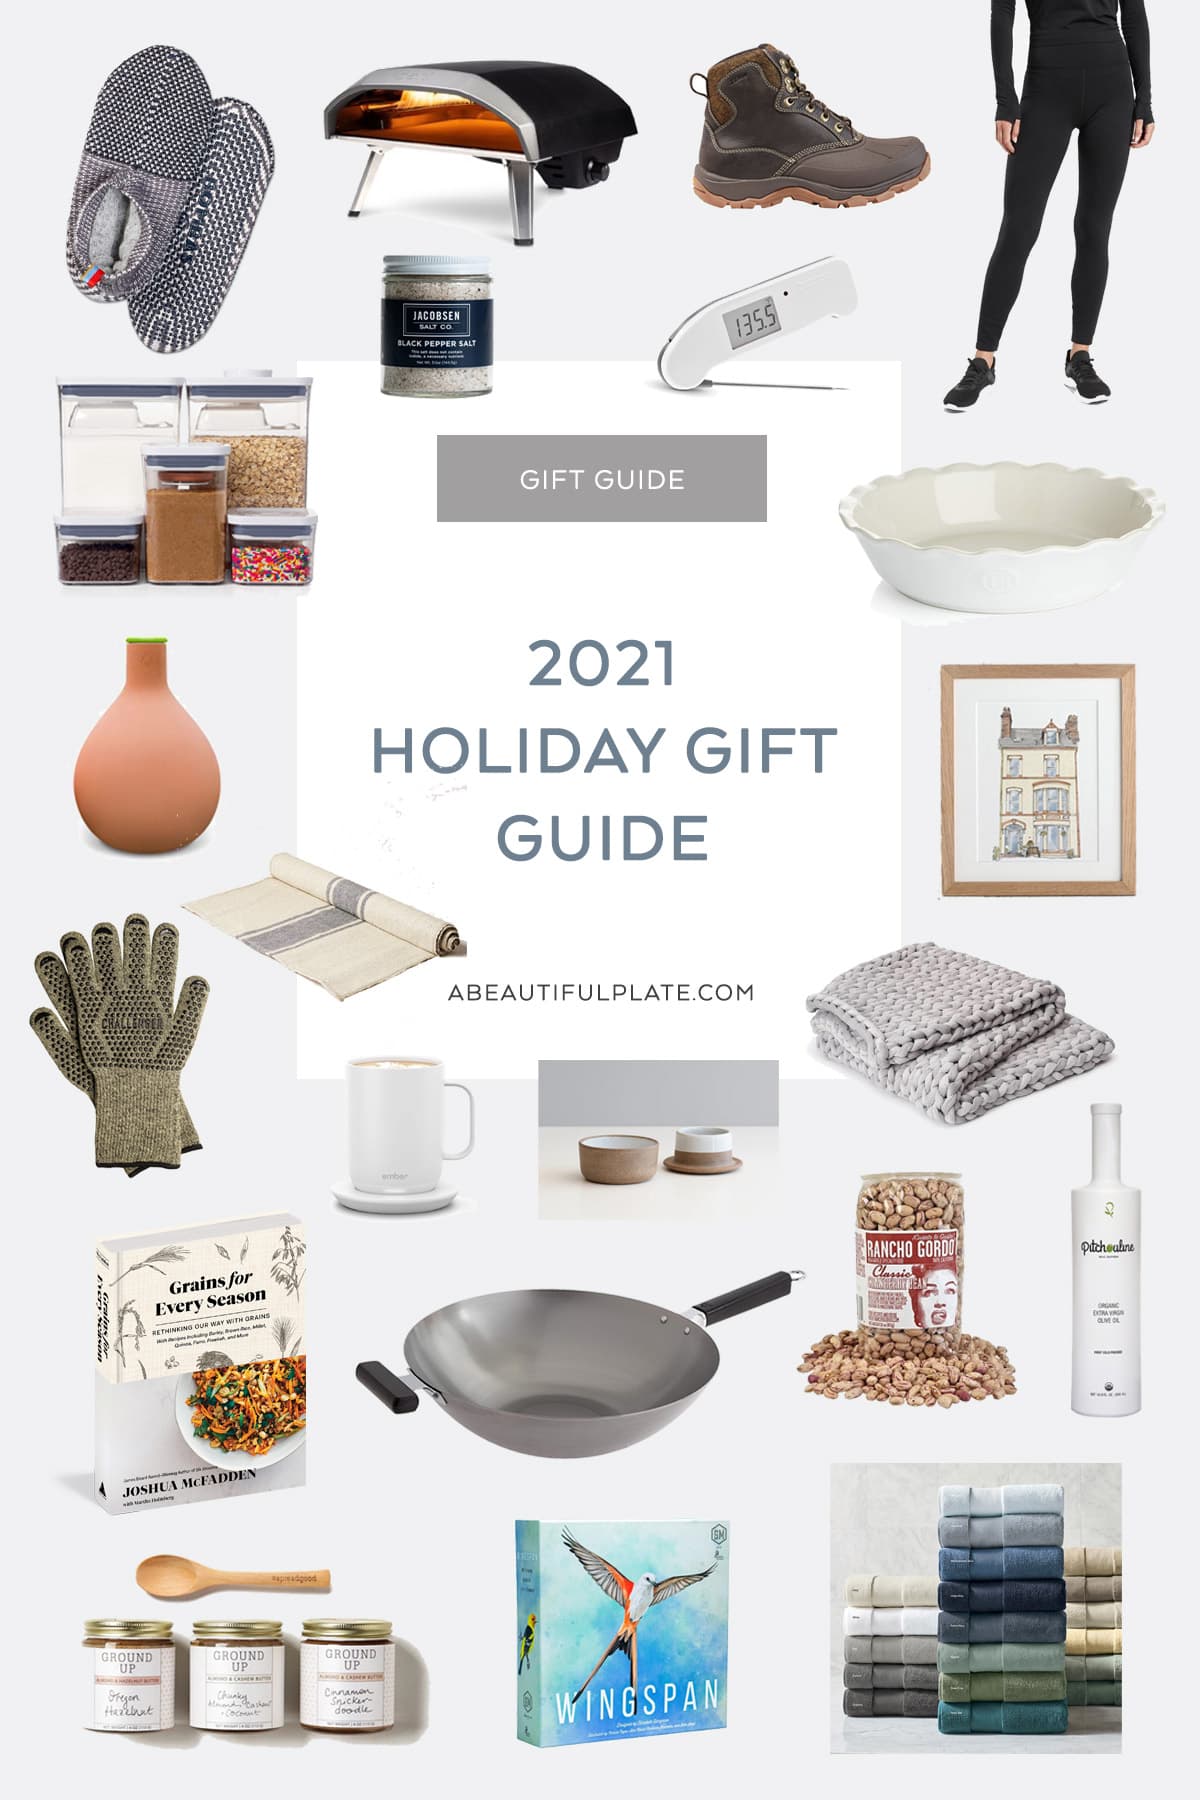 2021 Holiday Gift Guide - A Beautiful Plate